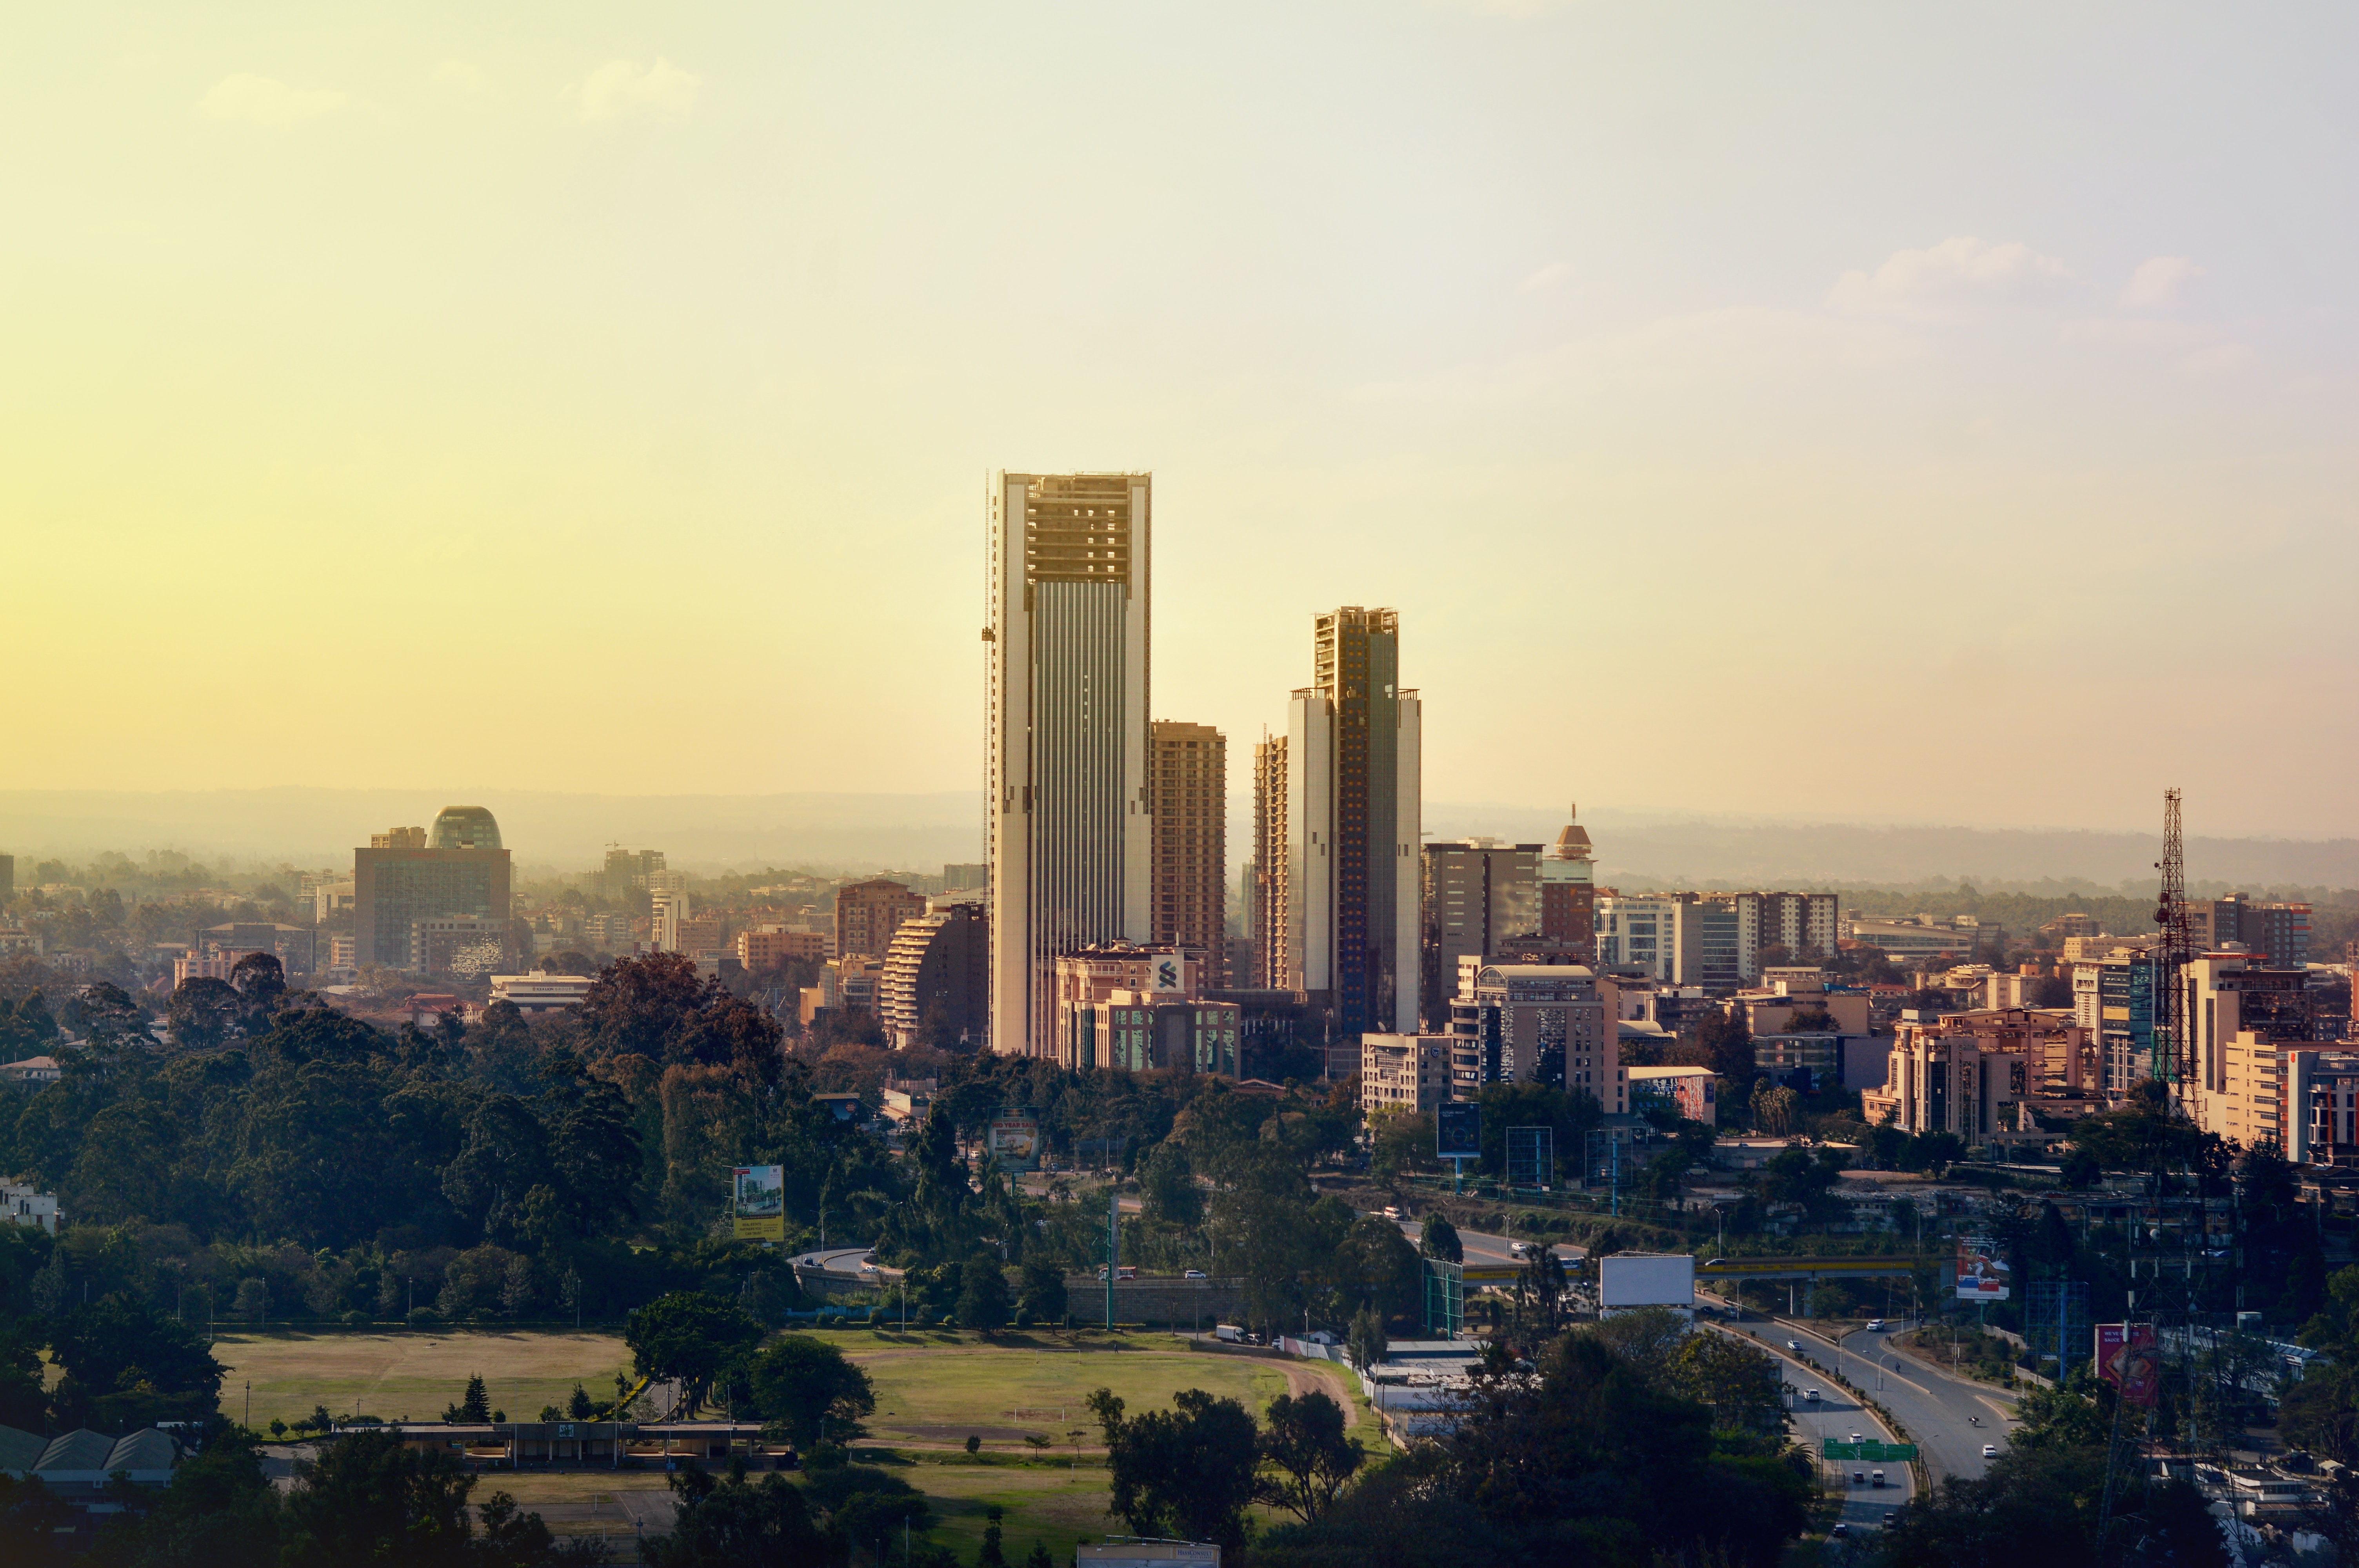 How Blended Finance Can Enable Ethiopia To Regain Its Place As Africa’s Growth Engine